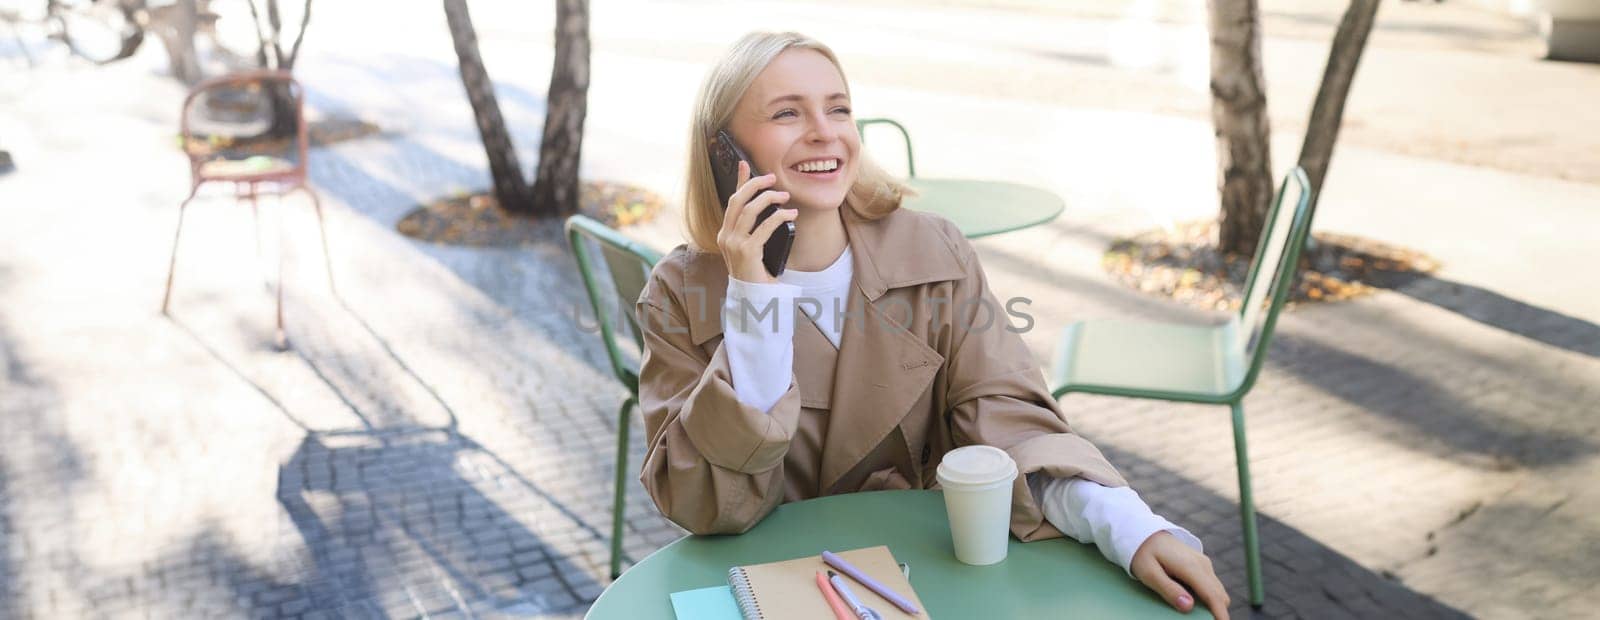 Cheerful young woman laughing, smiling while talking on mobile phone, sitting in cafe outdoors, enjoying friendly conversation.